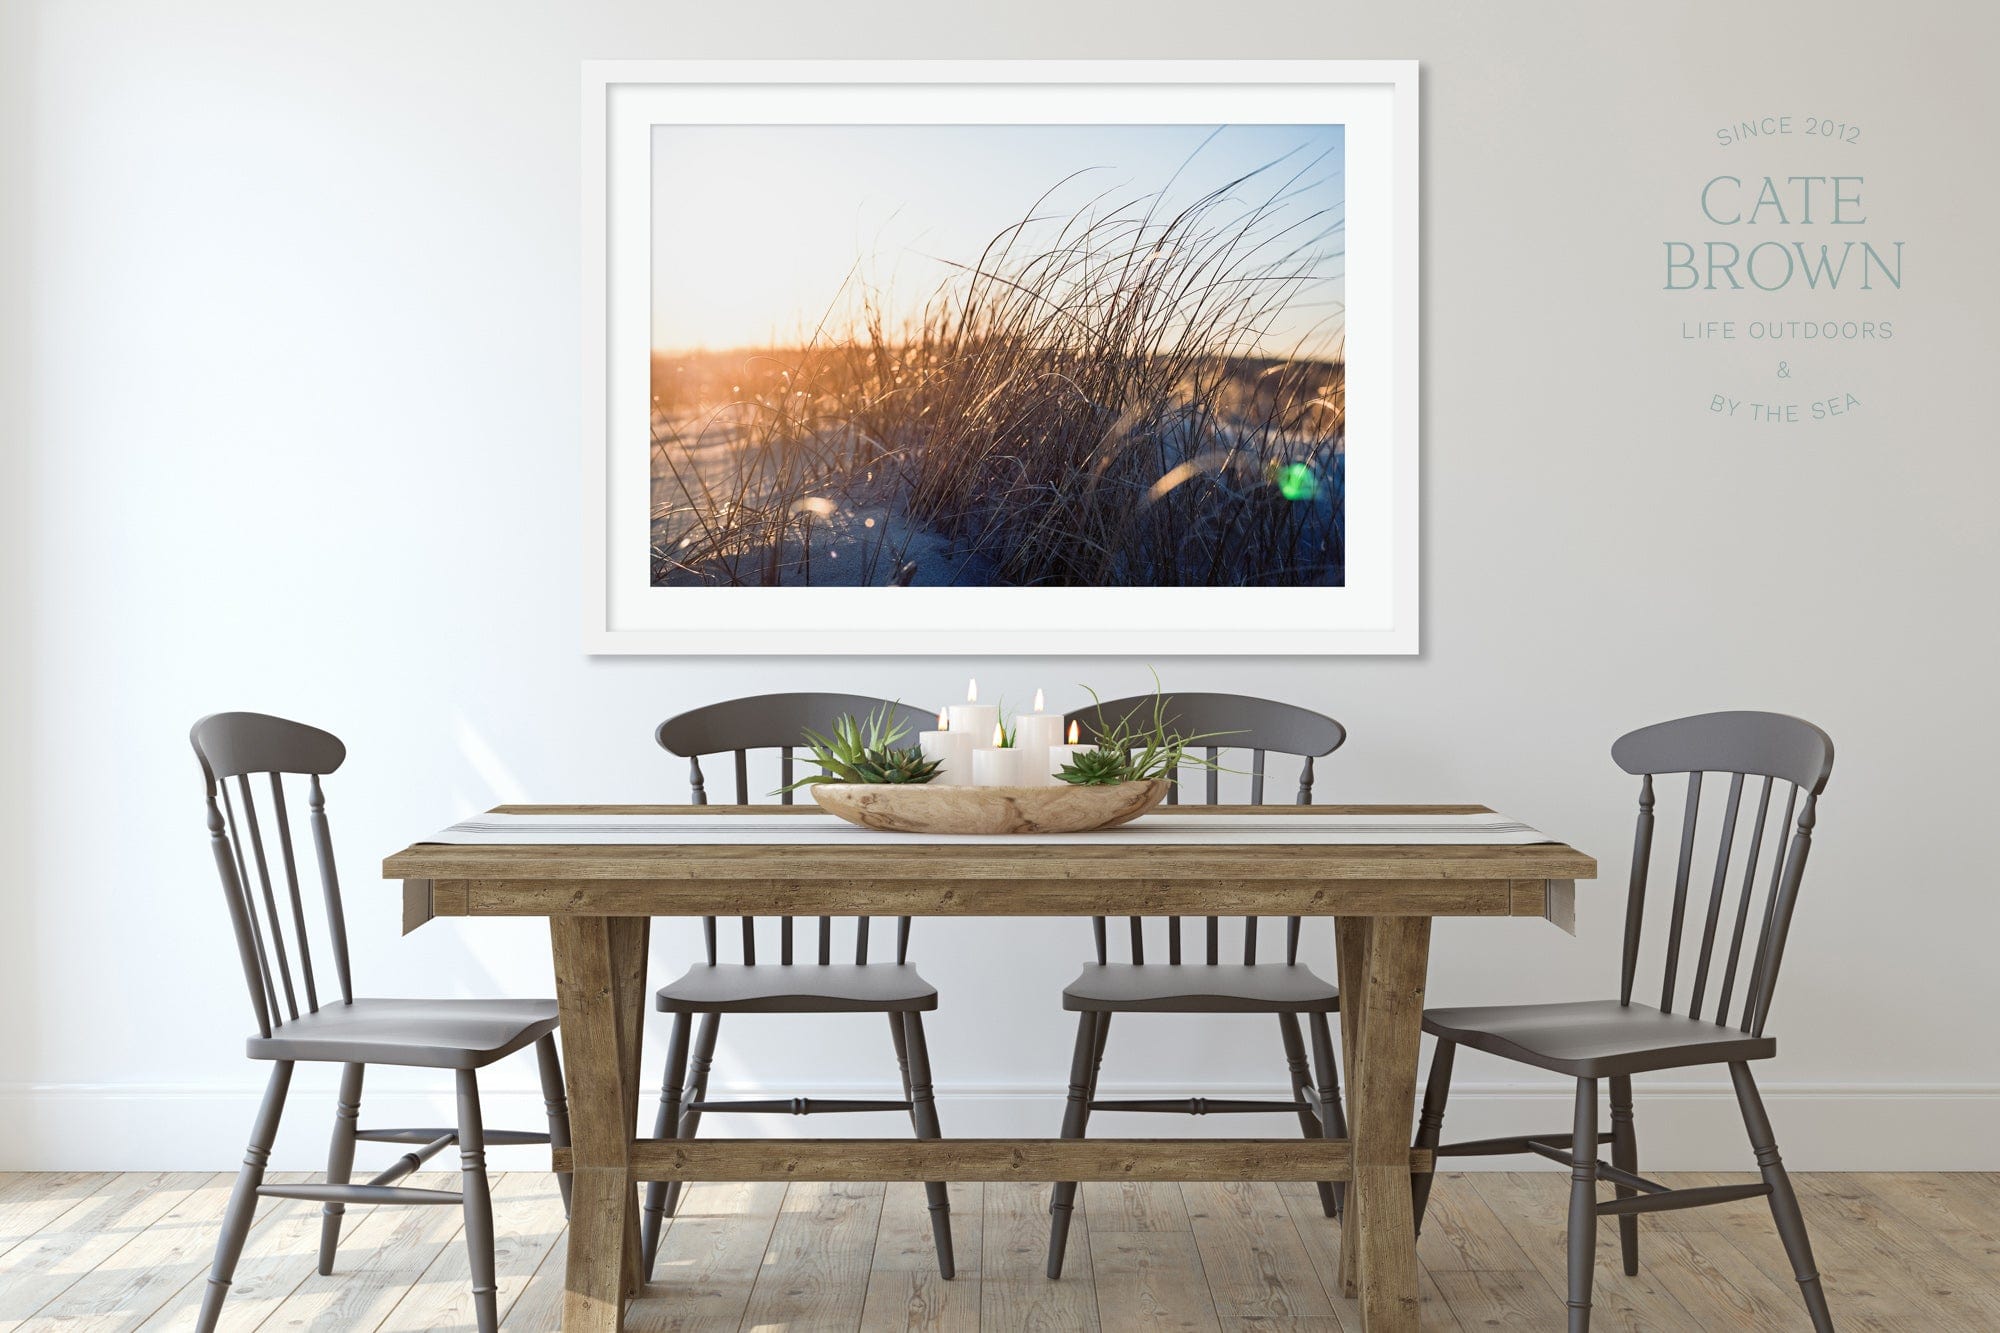 Cate Brown Photo Fine Art Print / 8"x12" / None (Print Only) Beach Grass in Gold #1  //  Film Photography Made to Order Ocean Fine Art